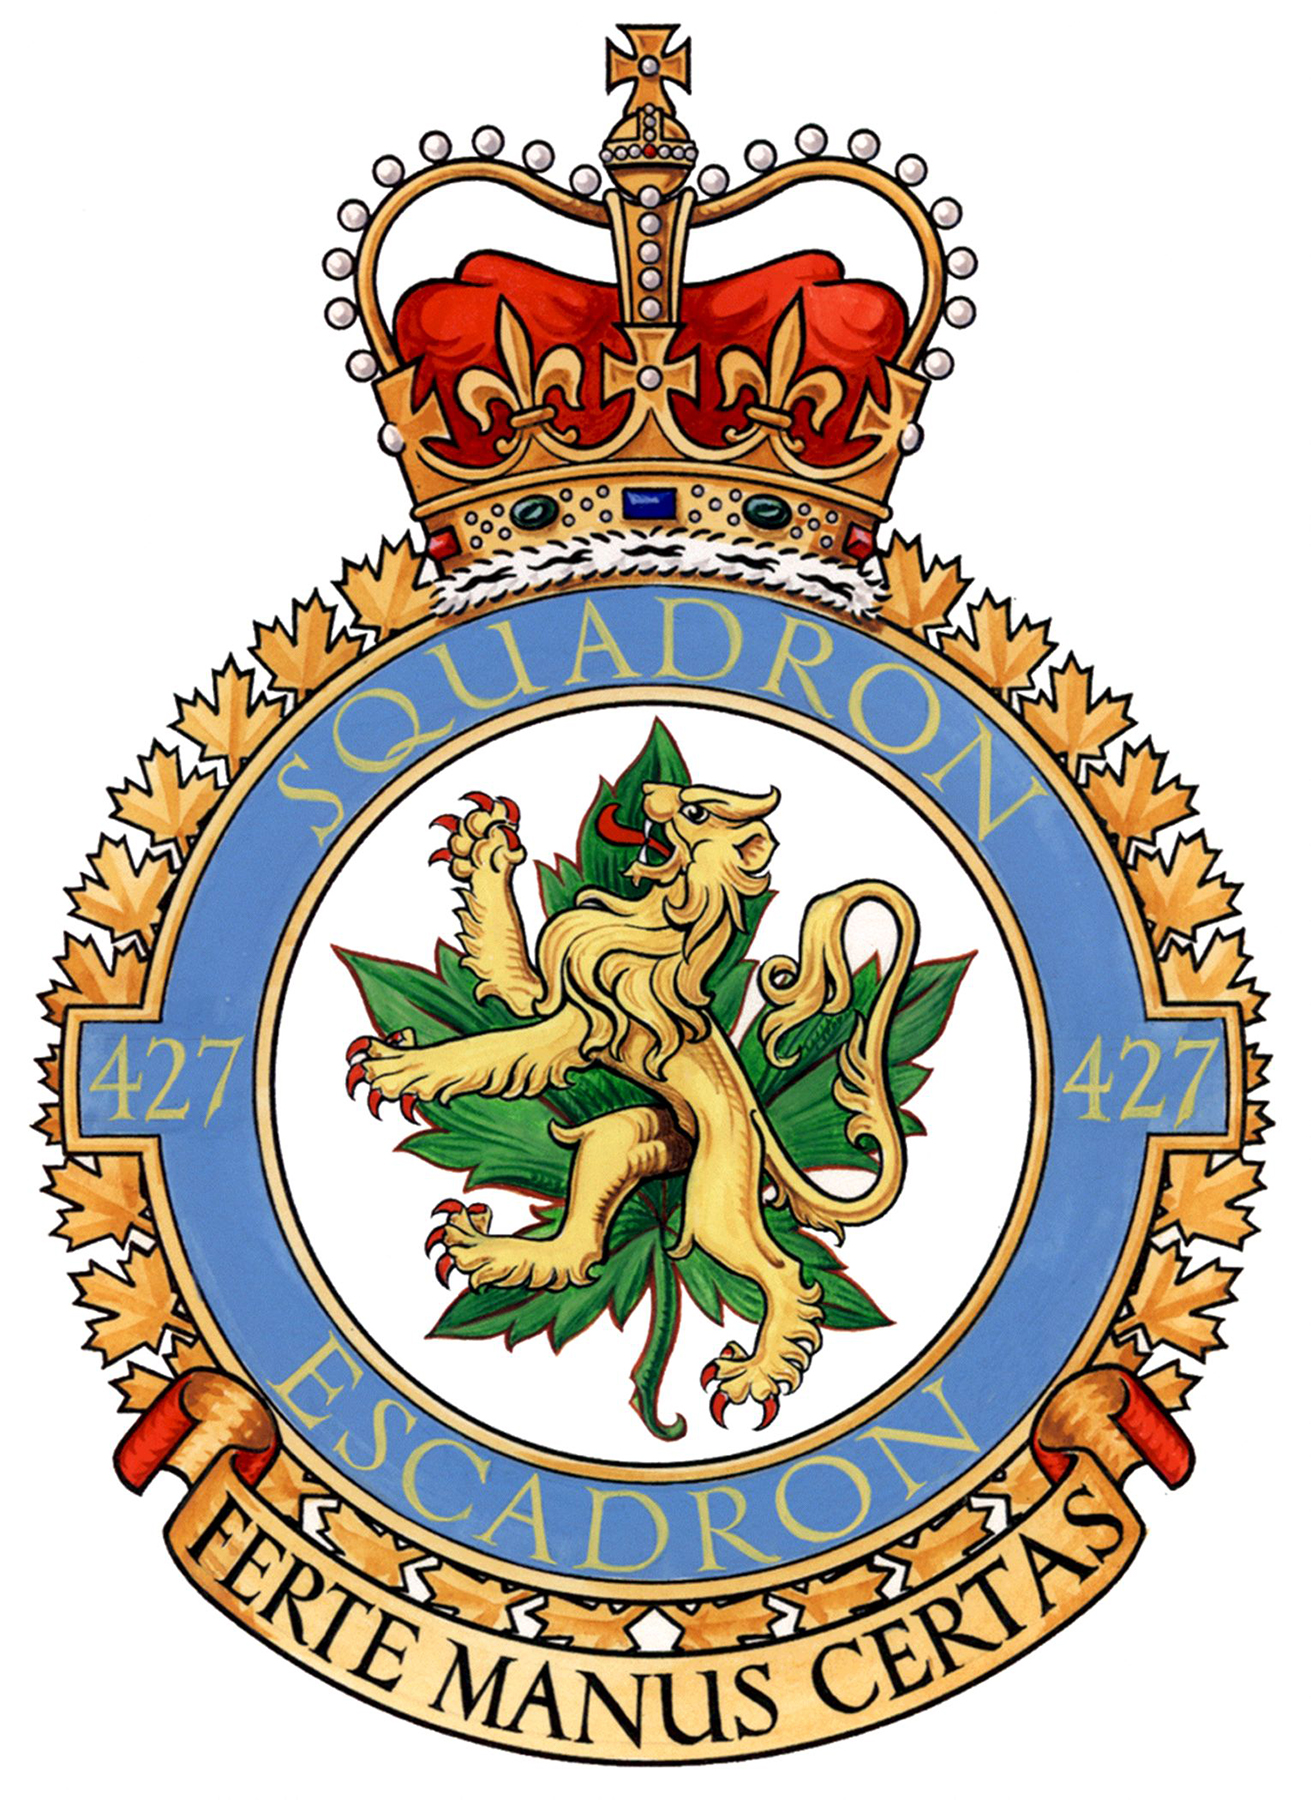 427 Squadron’s badge shows a lion standing upright with its forepaws raised in front of a green maple leaf. The combination of a lion representing the United Kingdom and a maple leaf representing Canada indicates the formation of the squadron in England. The squadron’s motto is "Ferte manus certas" – "Strike with a sure hand". IMAGE: DND